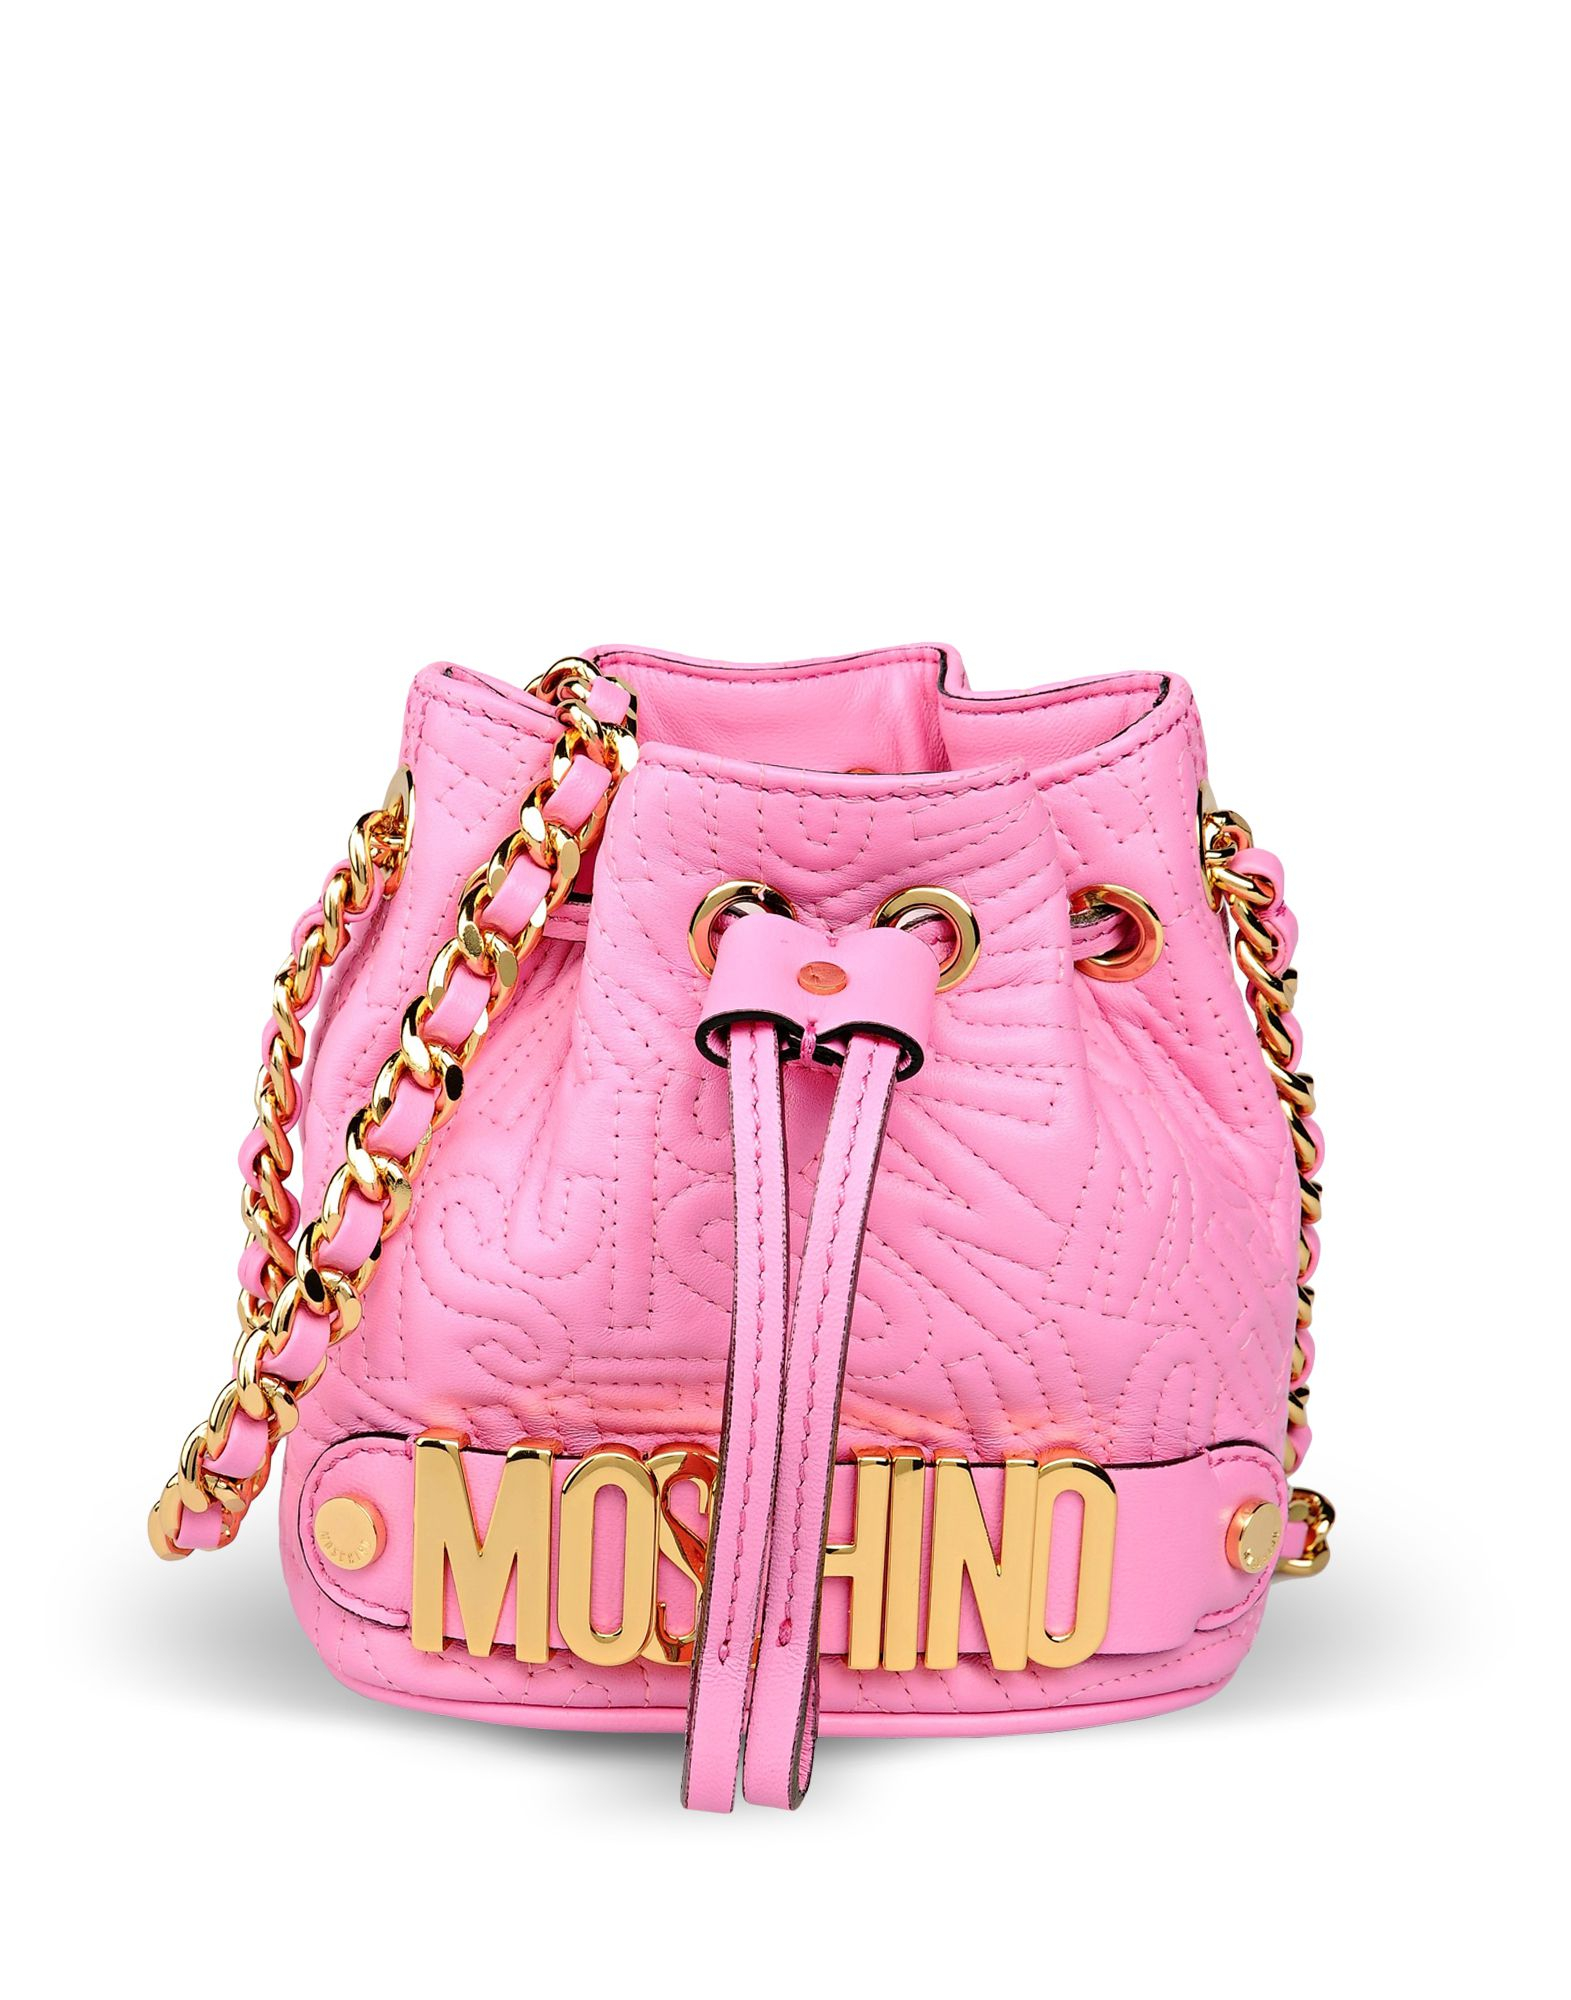 Moschino Small Leather Bag in Pink | Lyst